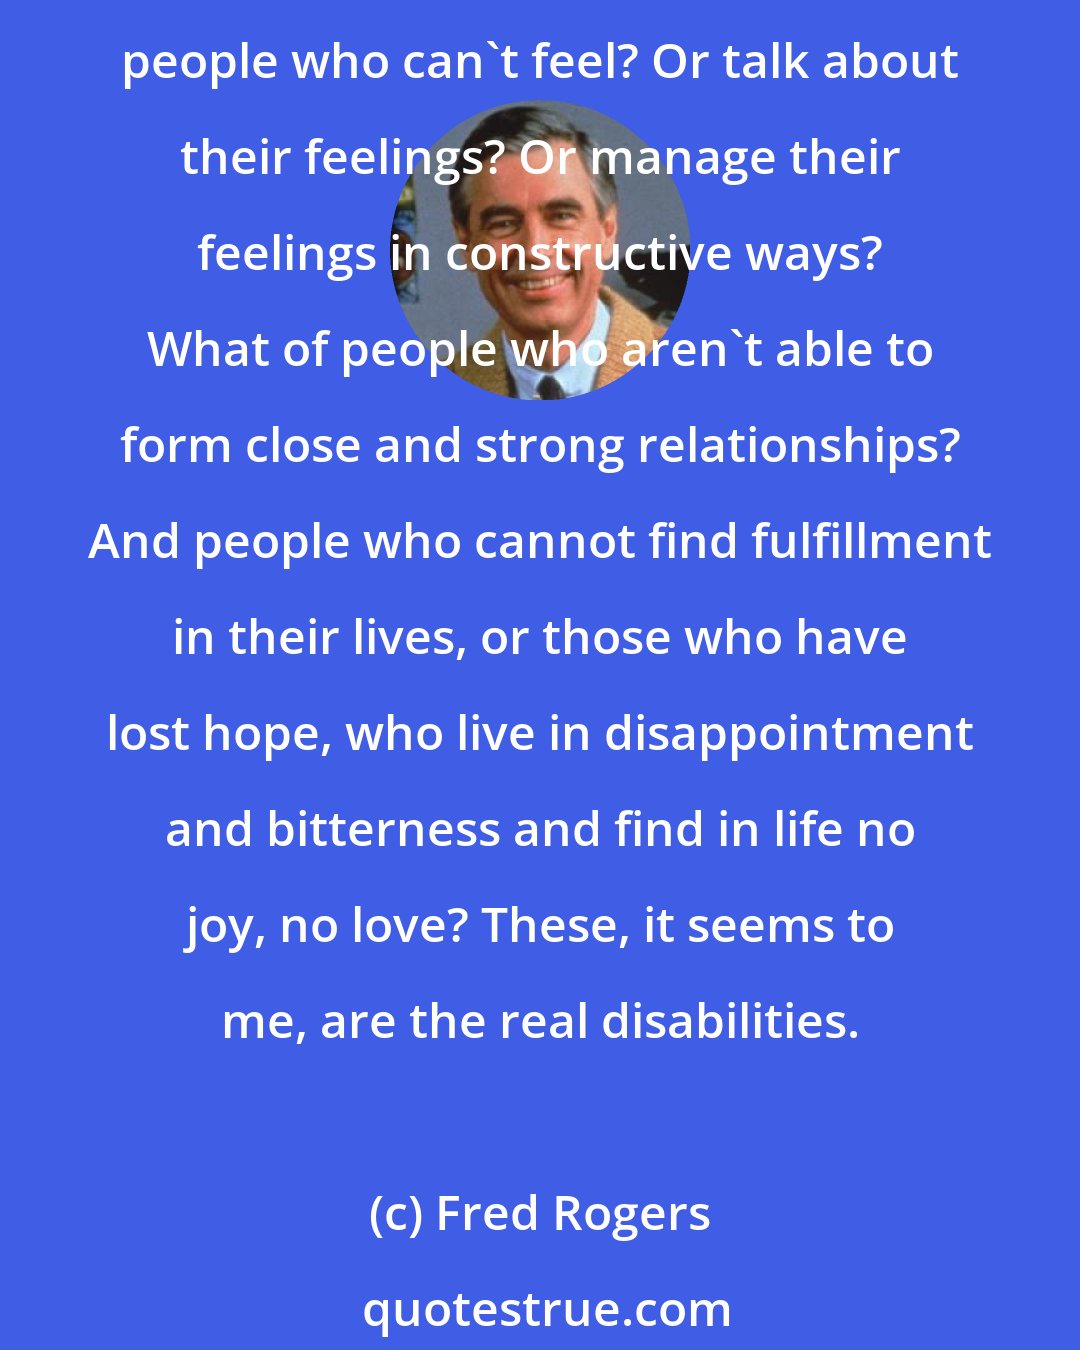 Fred Rogers: Part of the problem with the word 'disabilities' is that it immediately suggests an inability to see or hear or walk or do other things that many of us take for granted. But what of people who can't feel? Or talk about their feelings? Or manage their feelings in constructive ways? What of people who aren't able to form close and strong relationships? And people who cannot find fulfillment in their lives, or those who have lost hope, who live in disappointment and bitterness and find in life no joy, no love? These, it seems to me, are the real disabilities.